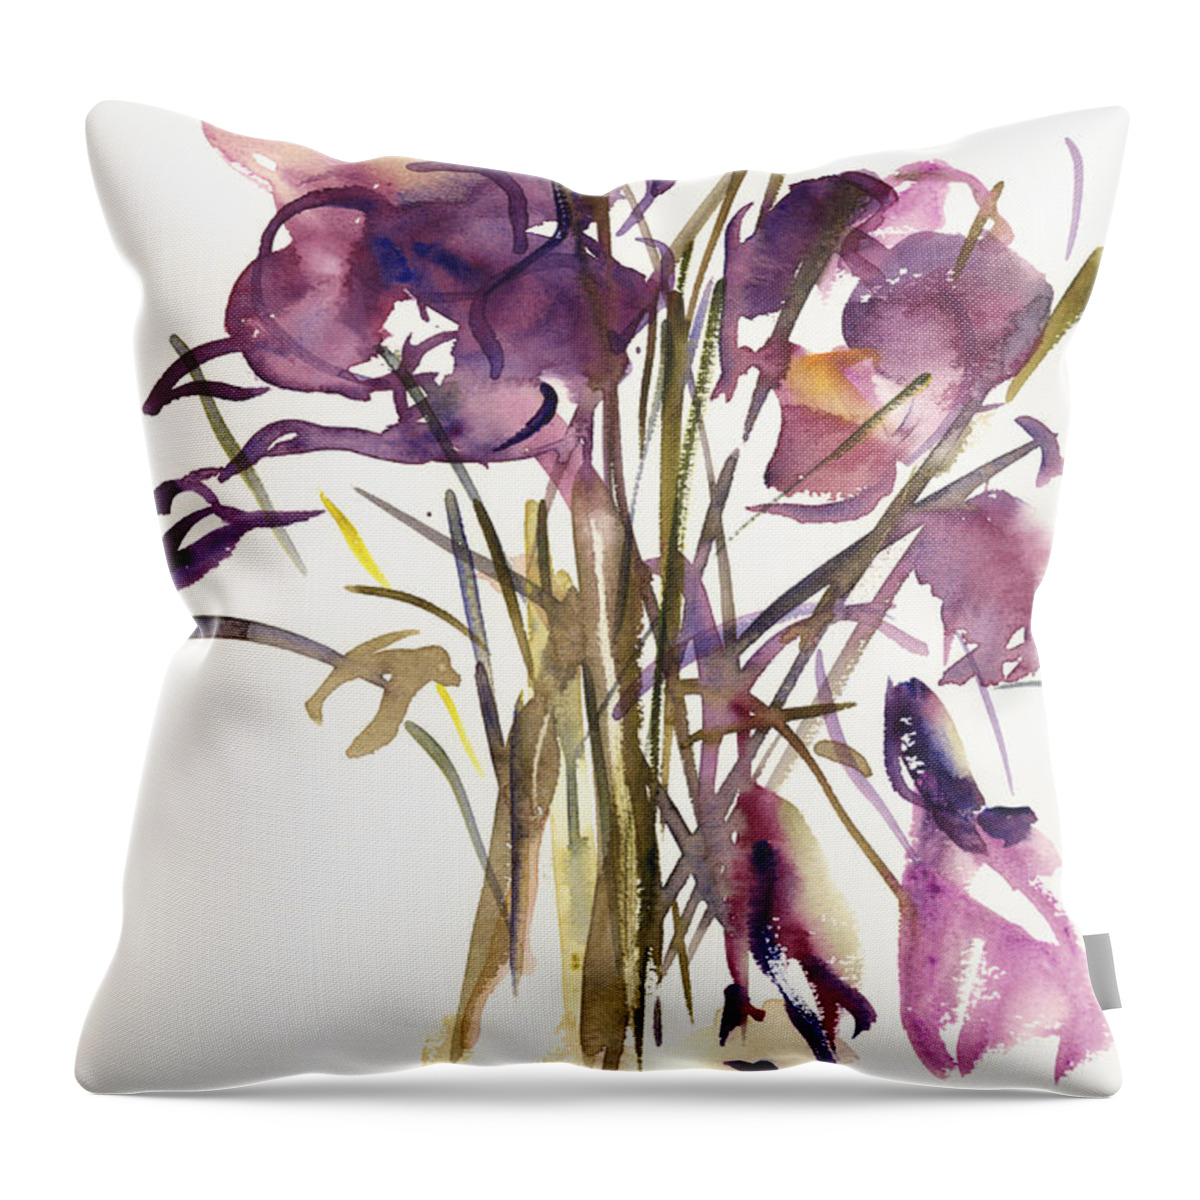 Crocuses Throw Pillow featuring the painting Crocus by Claudia Hutchins-Puechavy